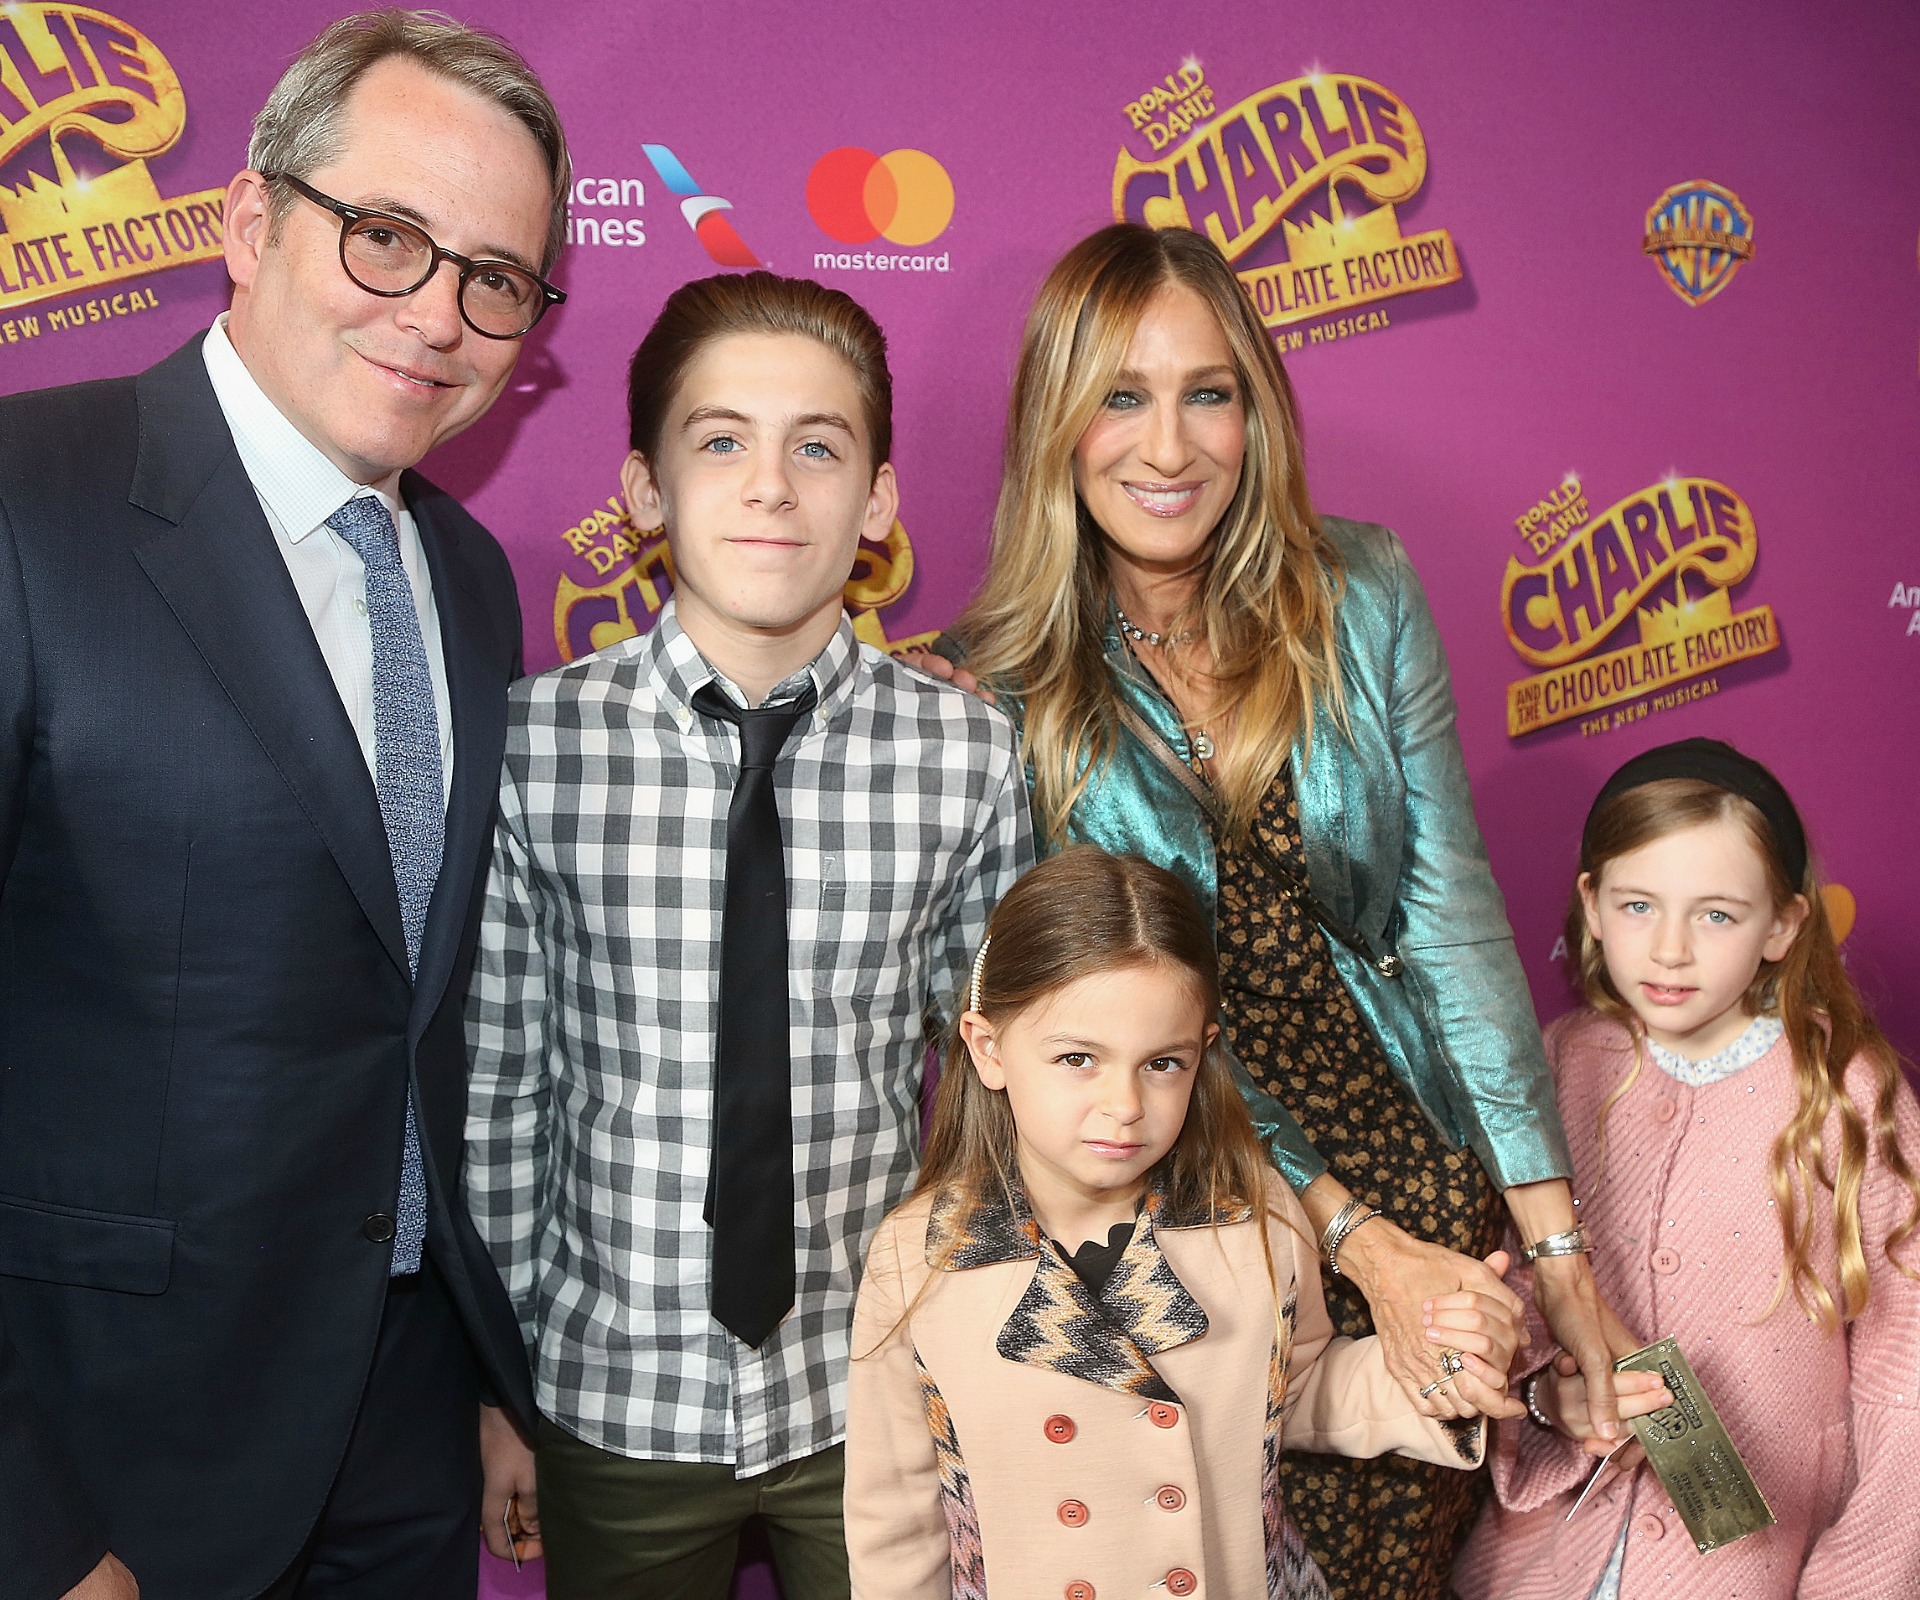 Sarah Jessica Parker and Matthew Broderick make a rare public appearance with their kids